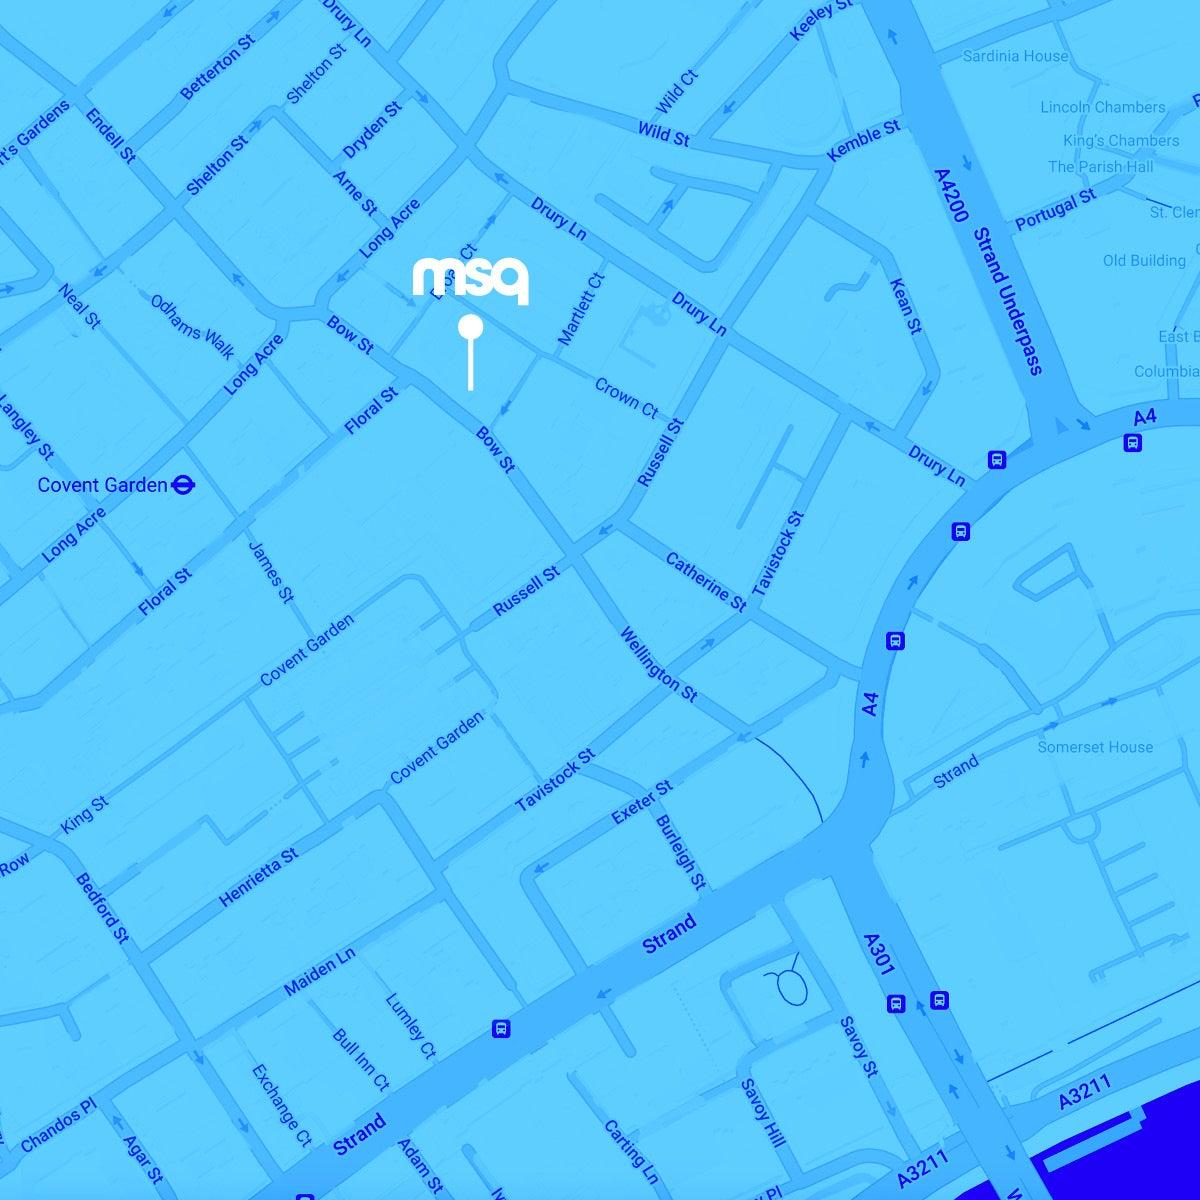 The MSQ office in London shown on a map